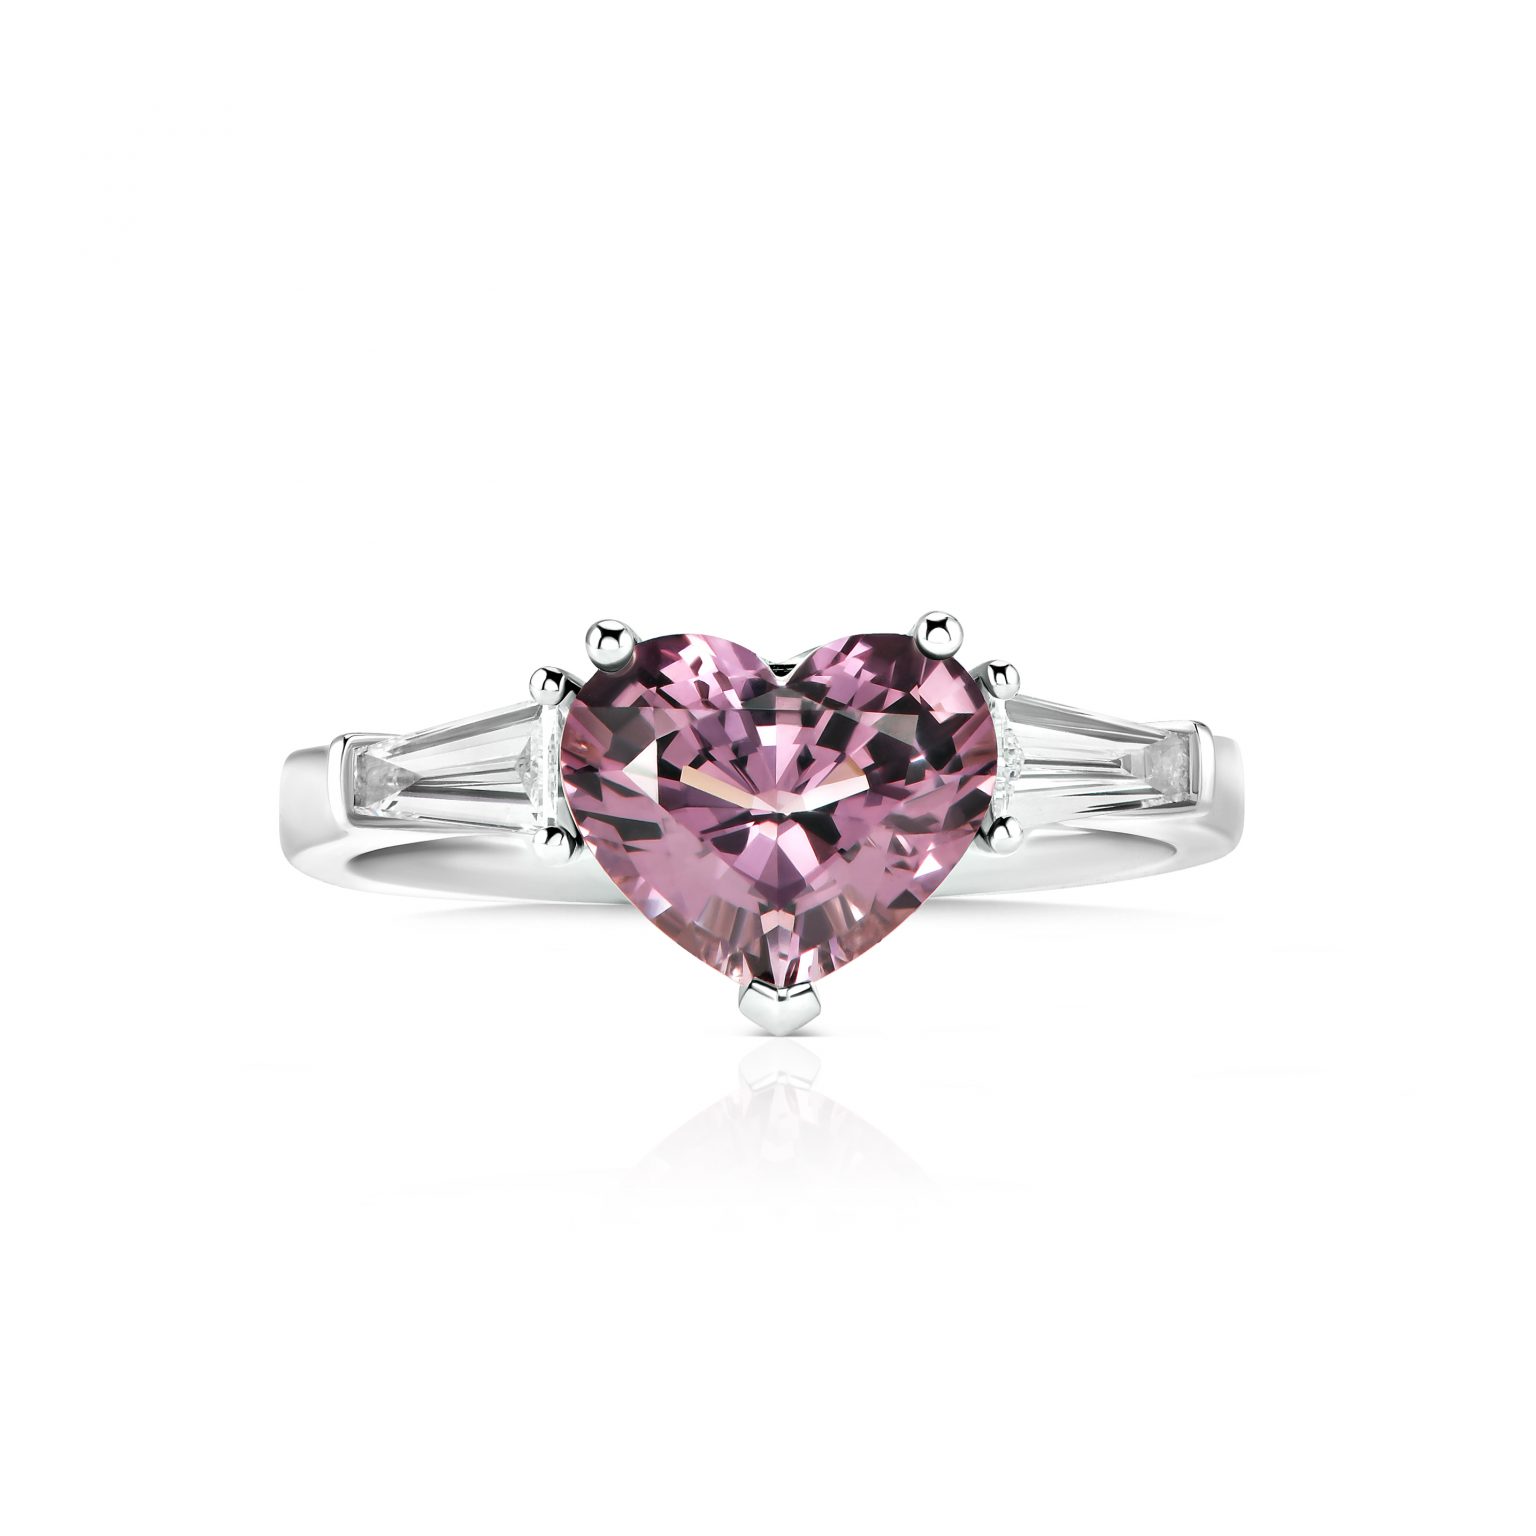 Spinel ring 1.92 ct